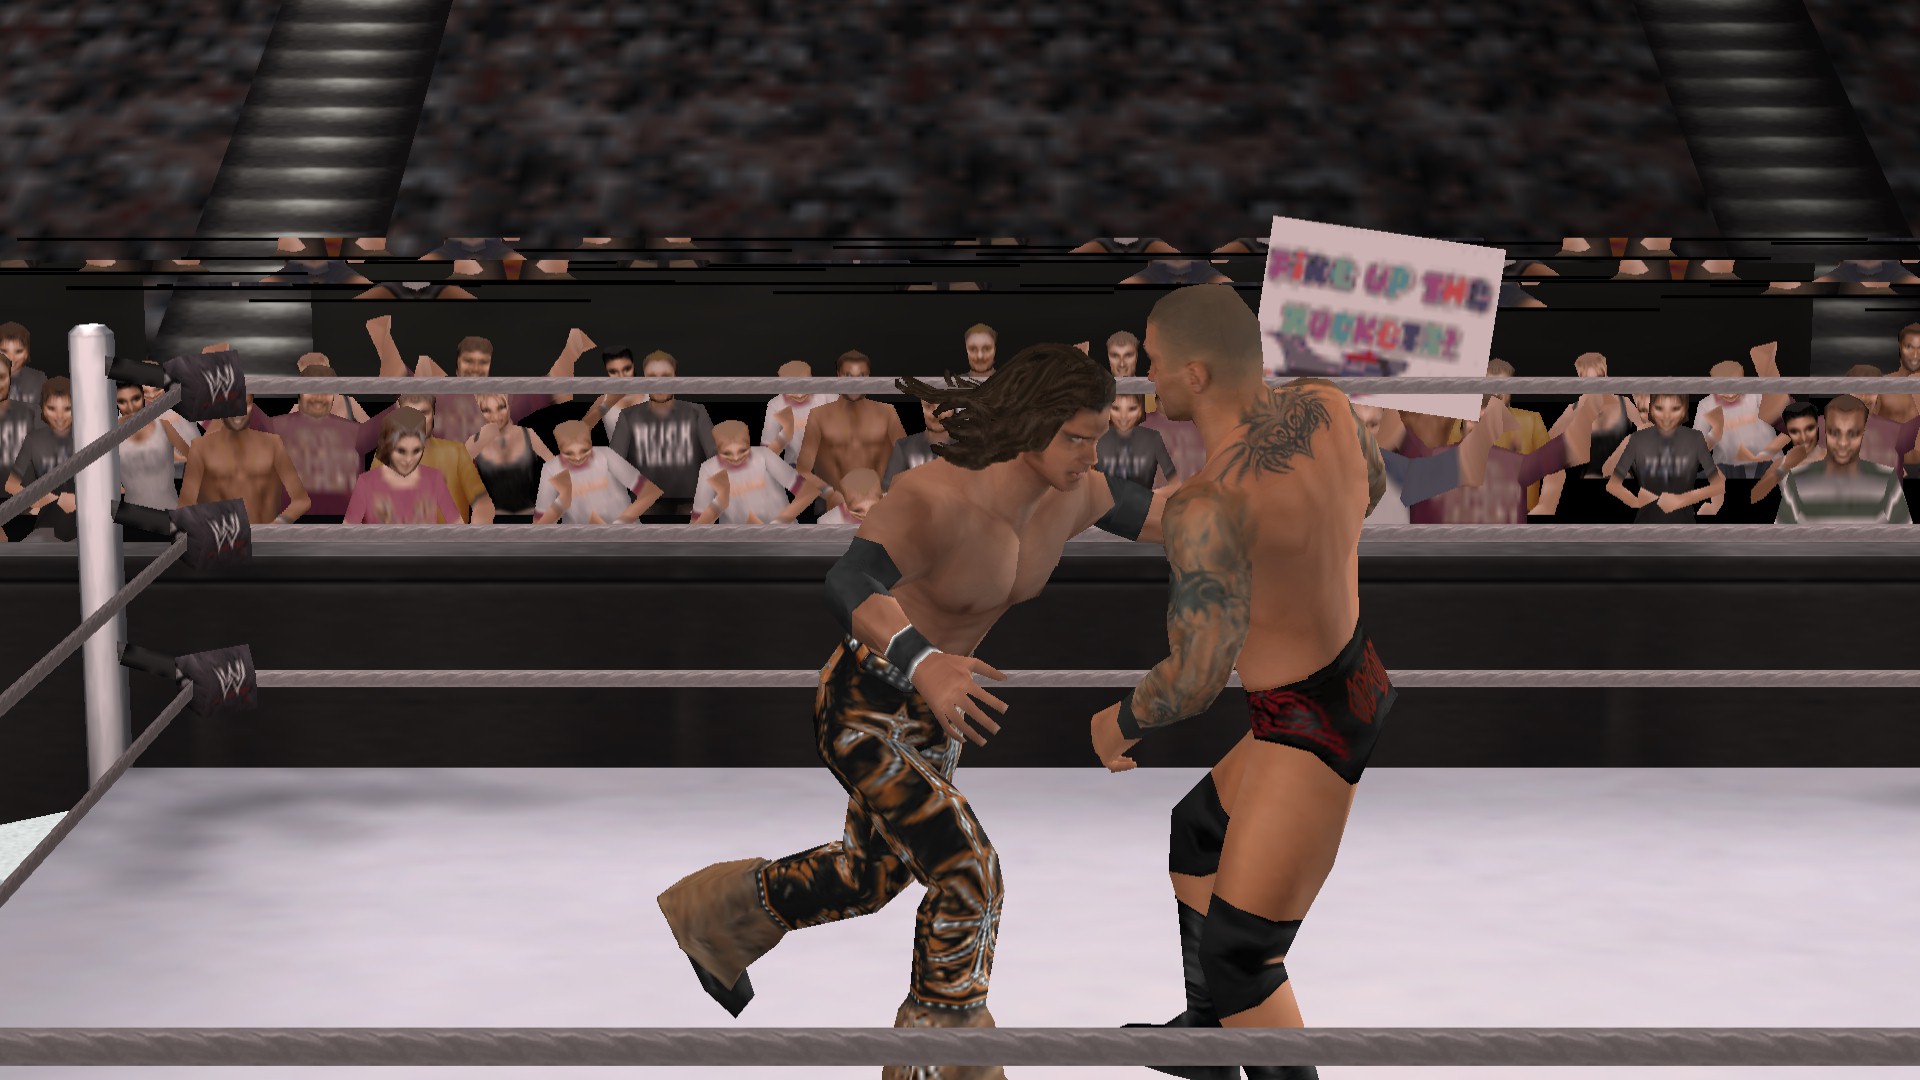 Wrestling Games For Mac Os X